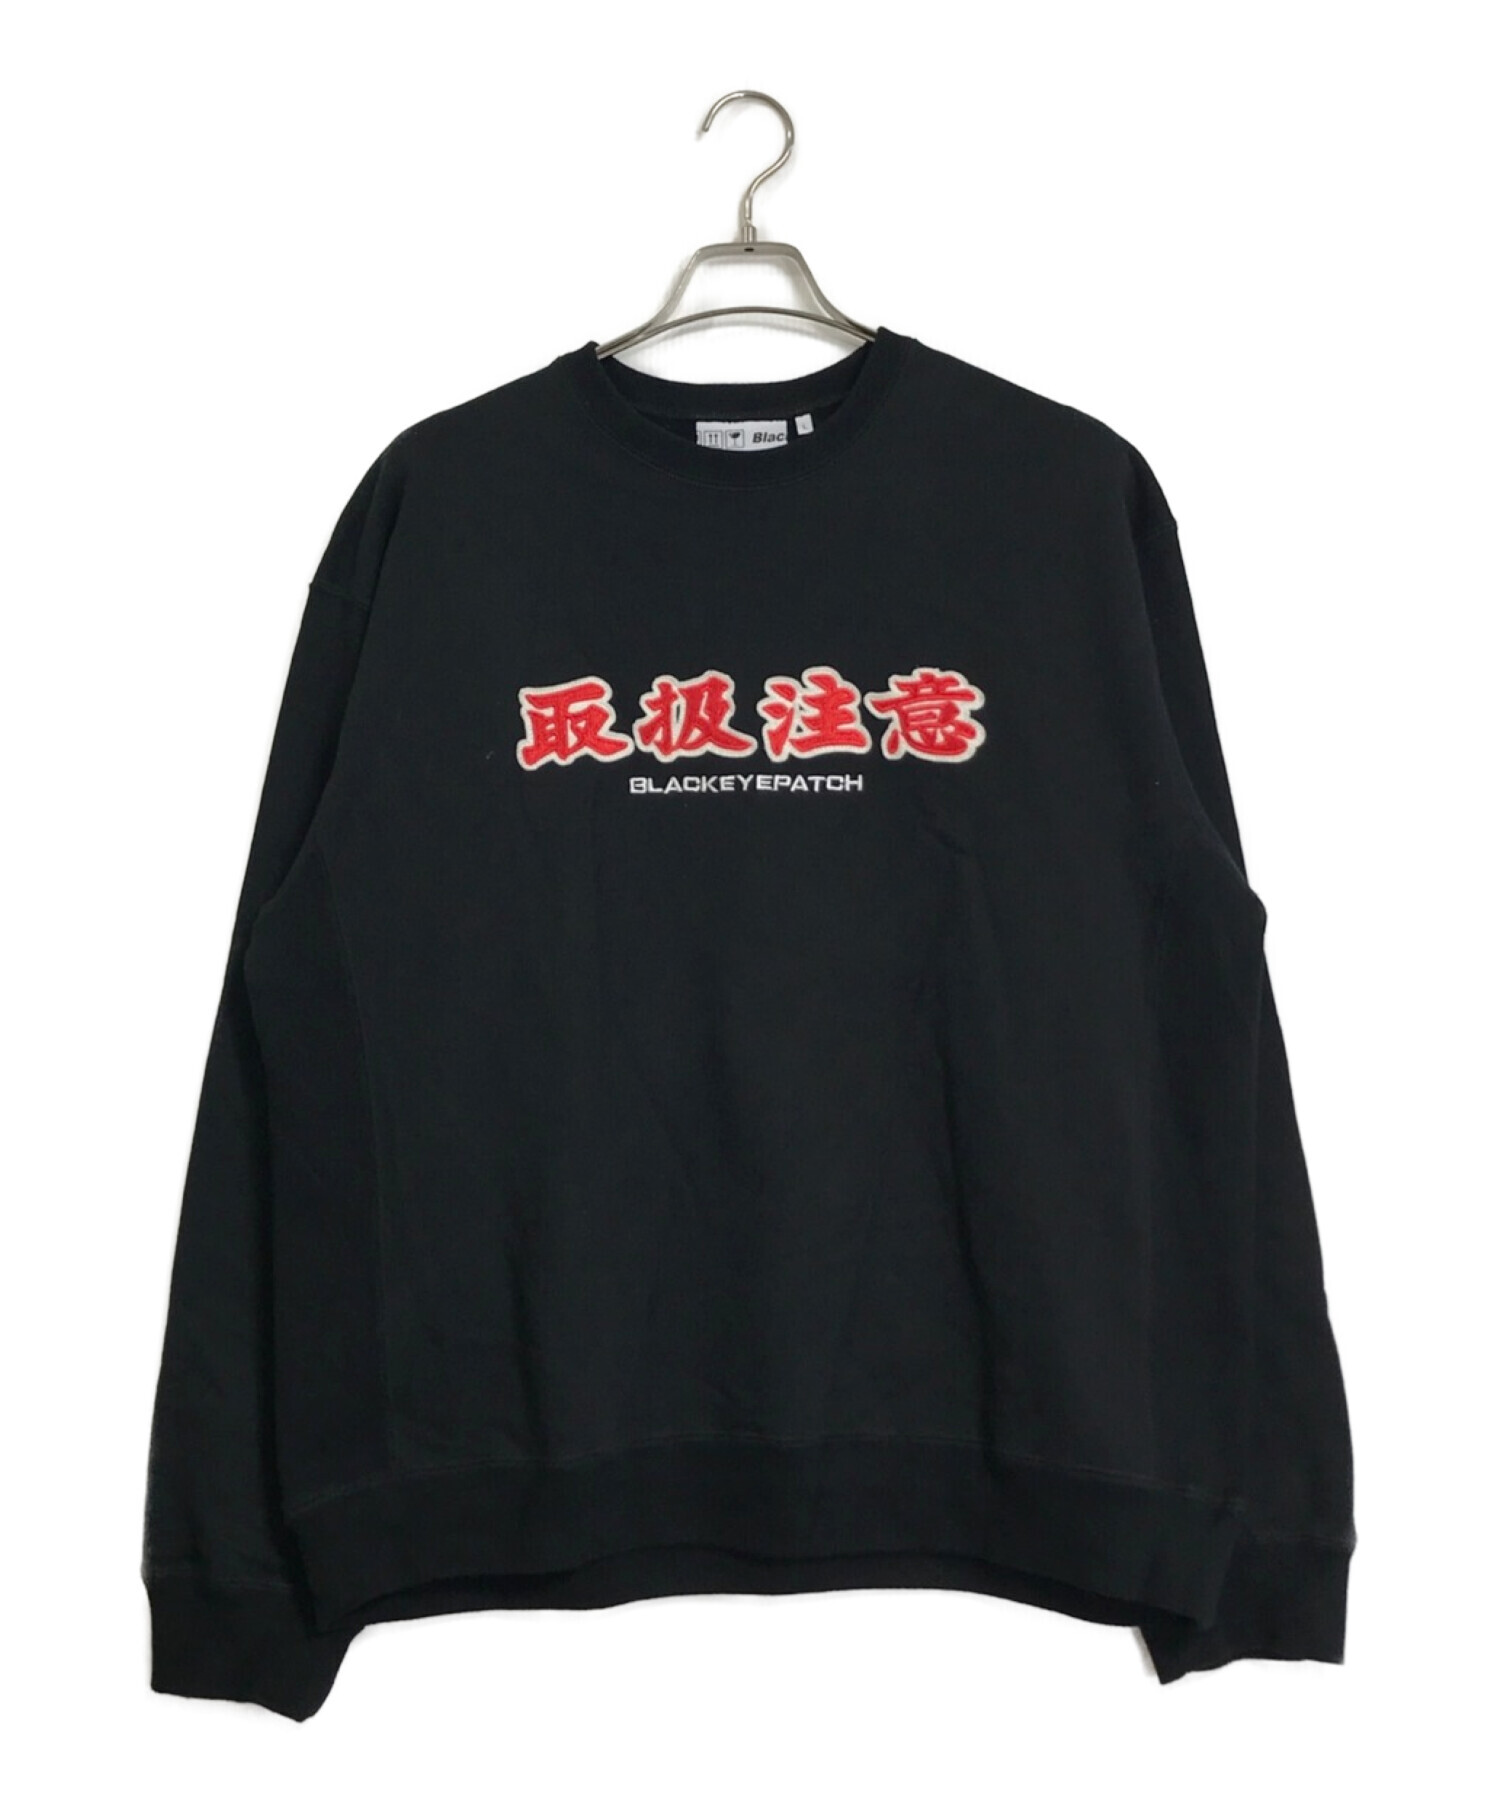 BLACKEYEPATCH HANDLE WITH CARE CREWSWEAT